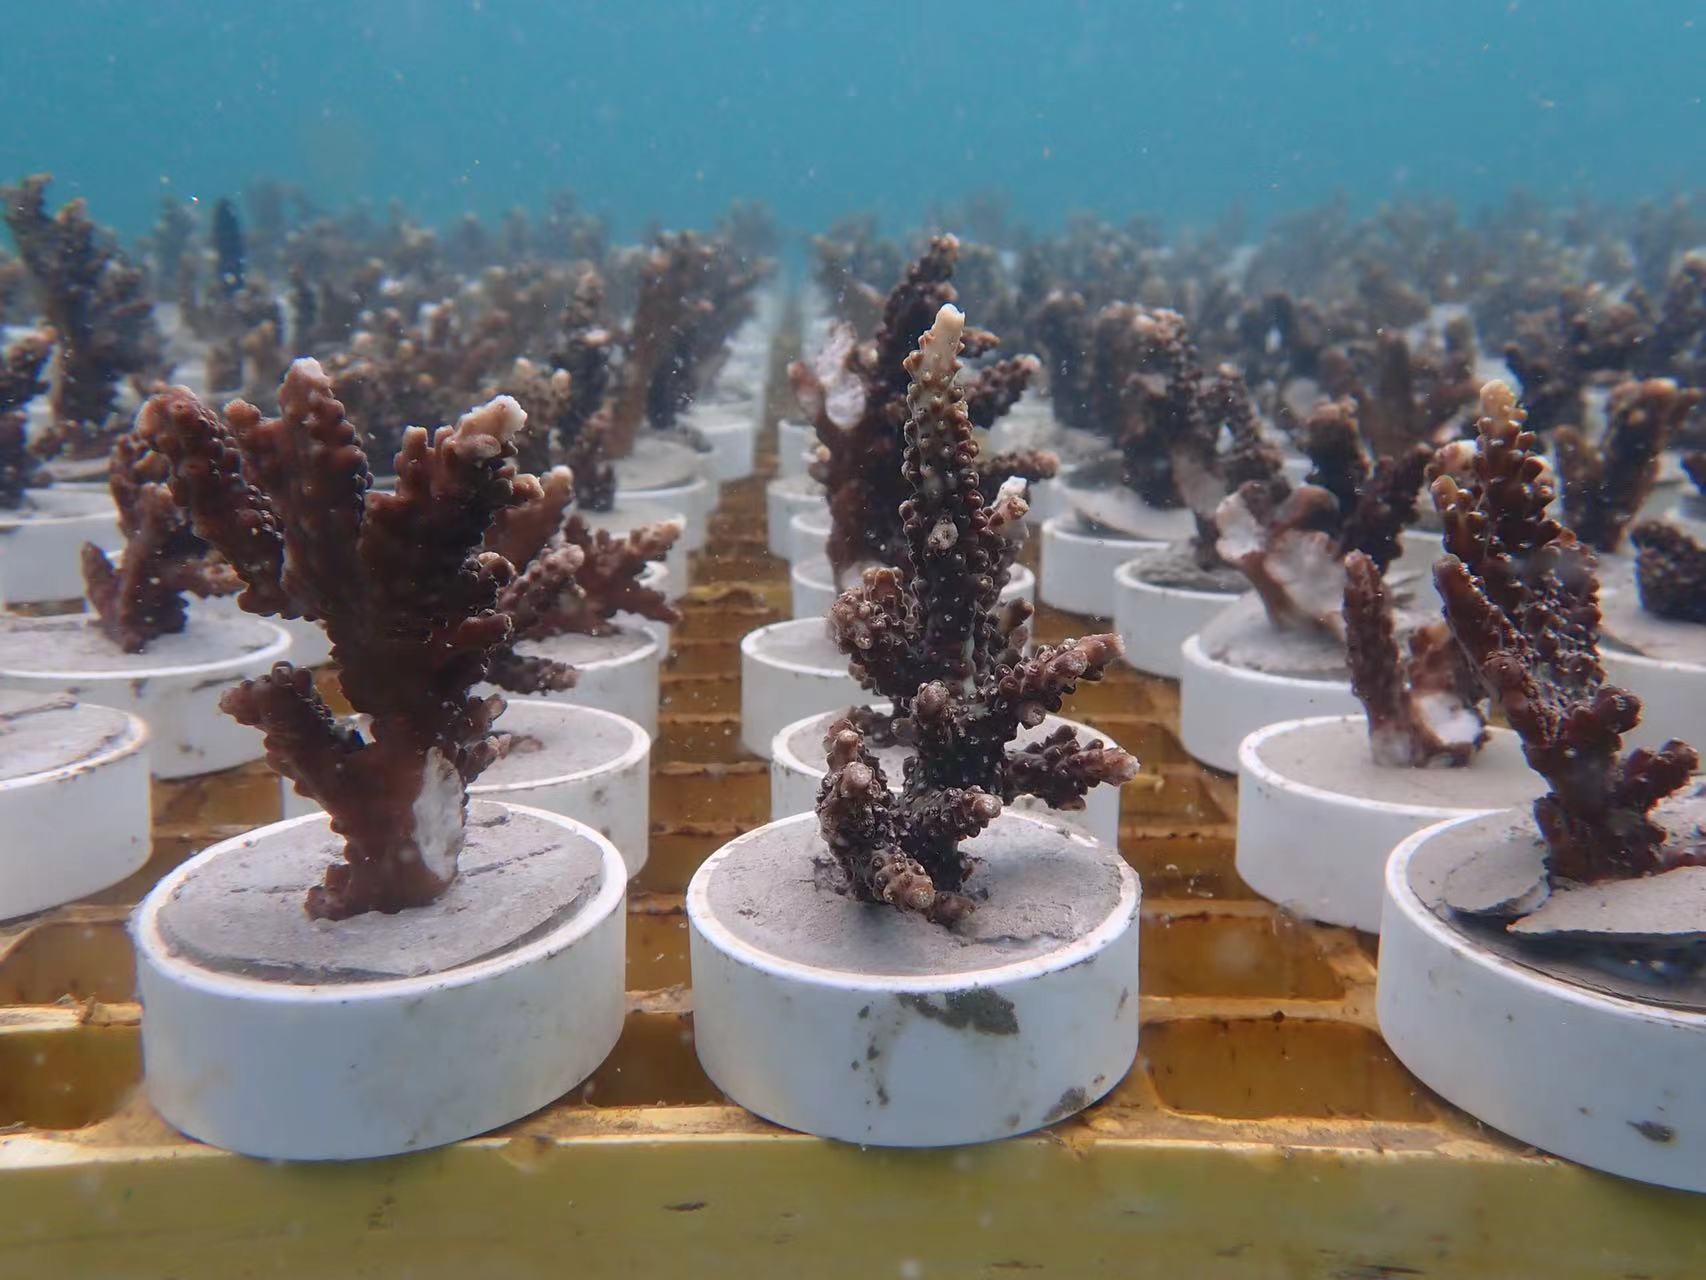 Corals planted in the ocean.